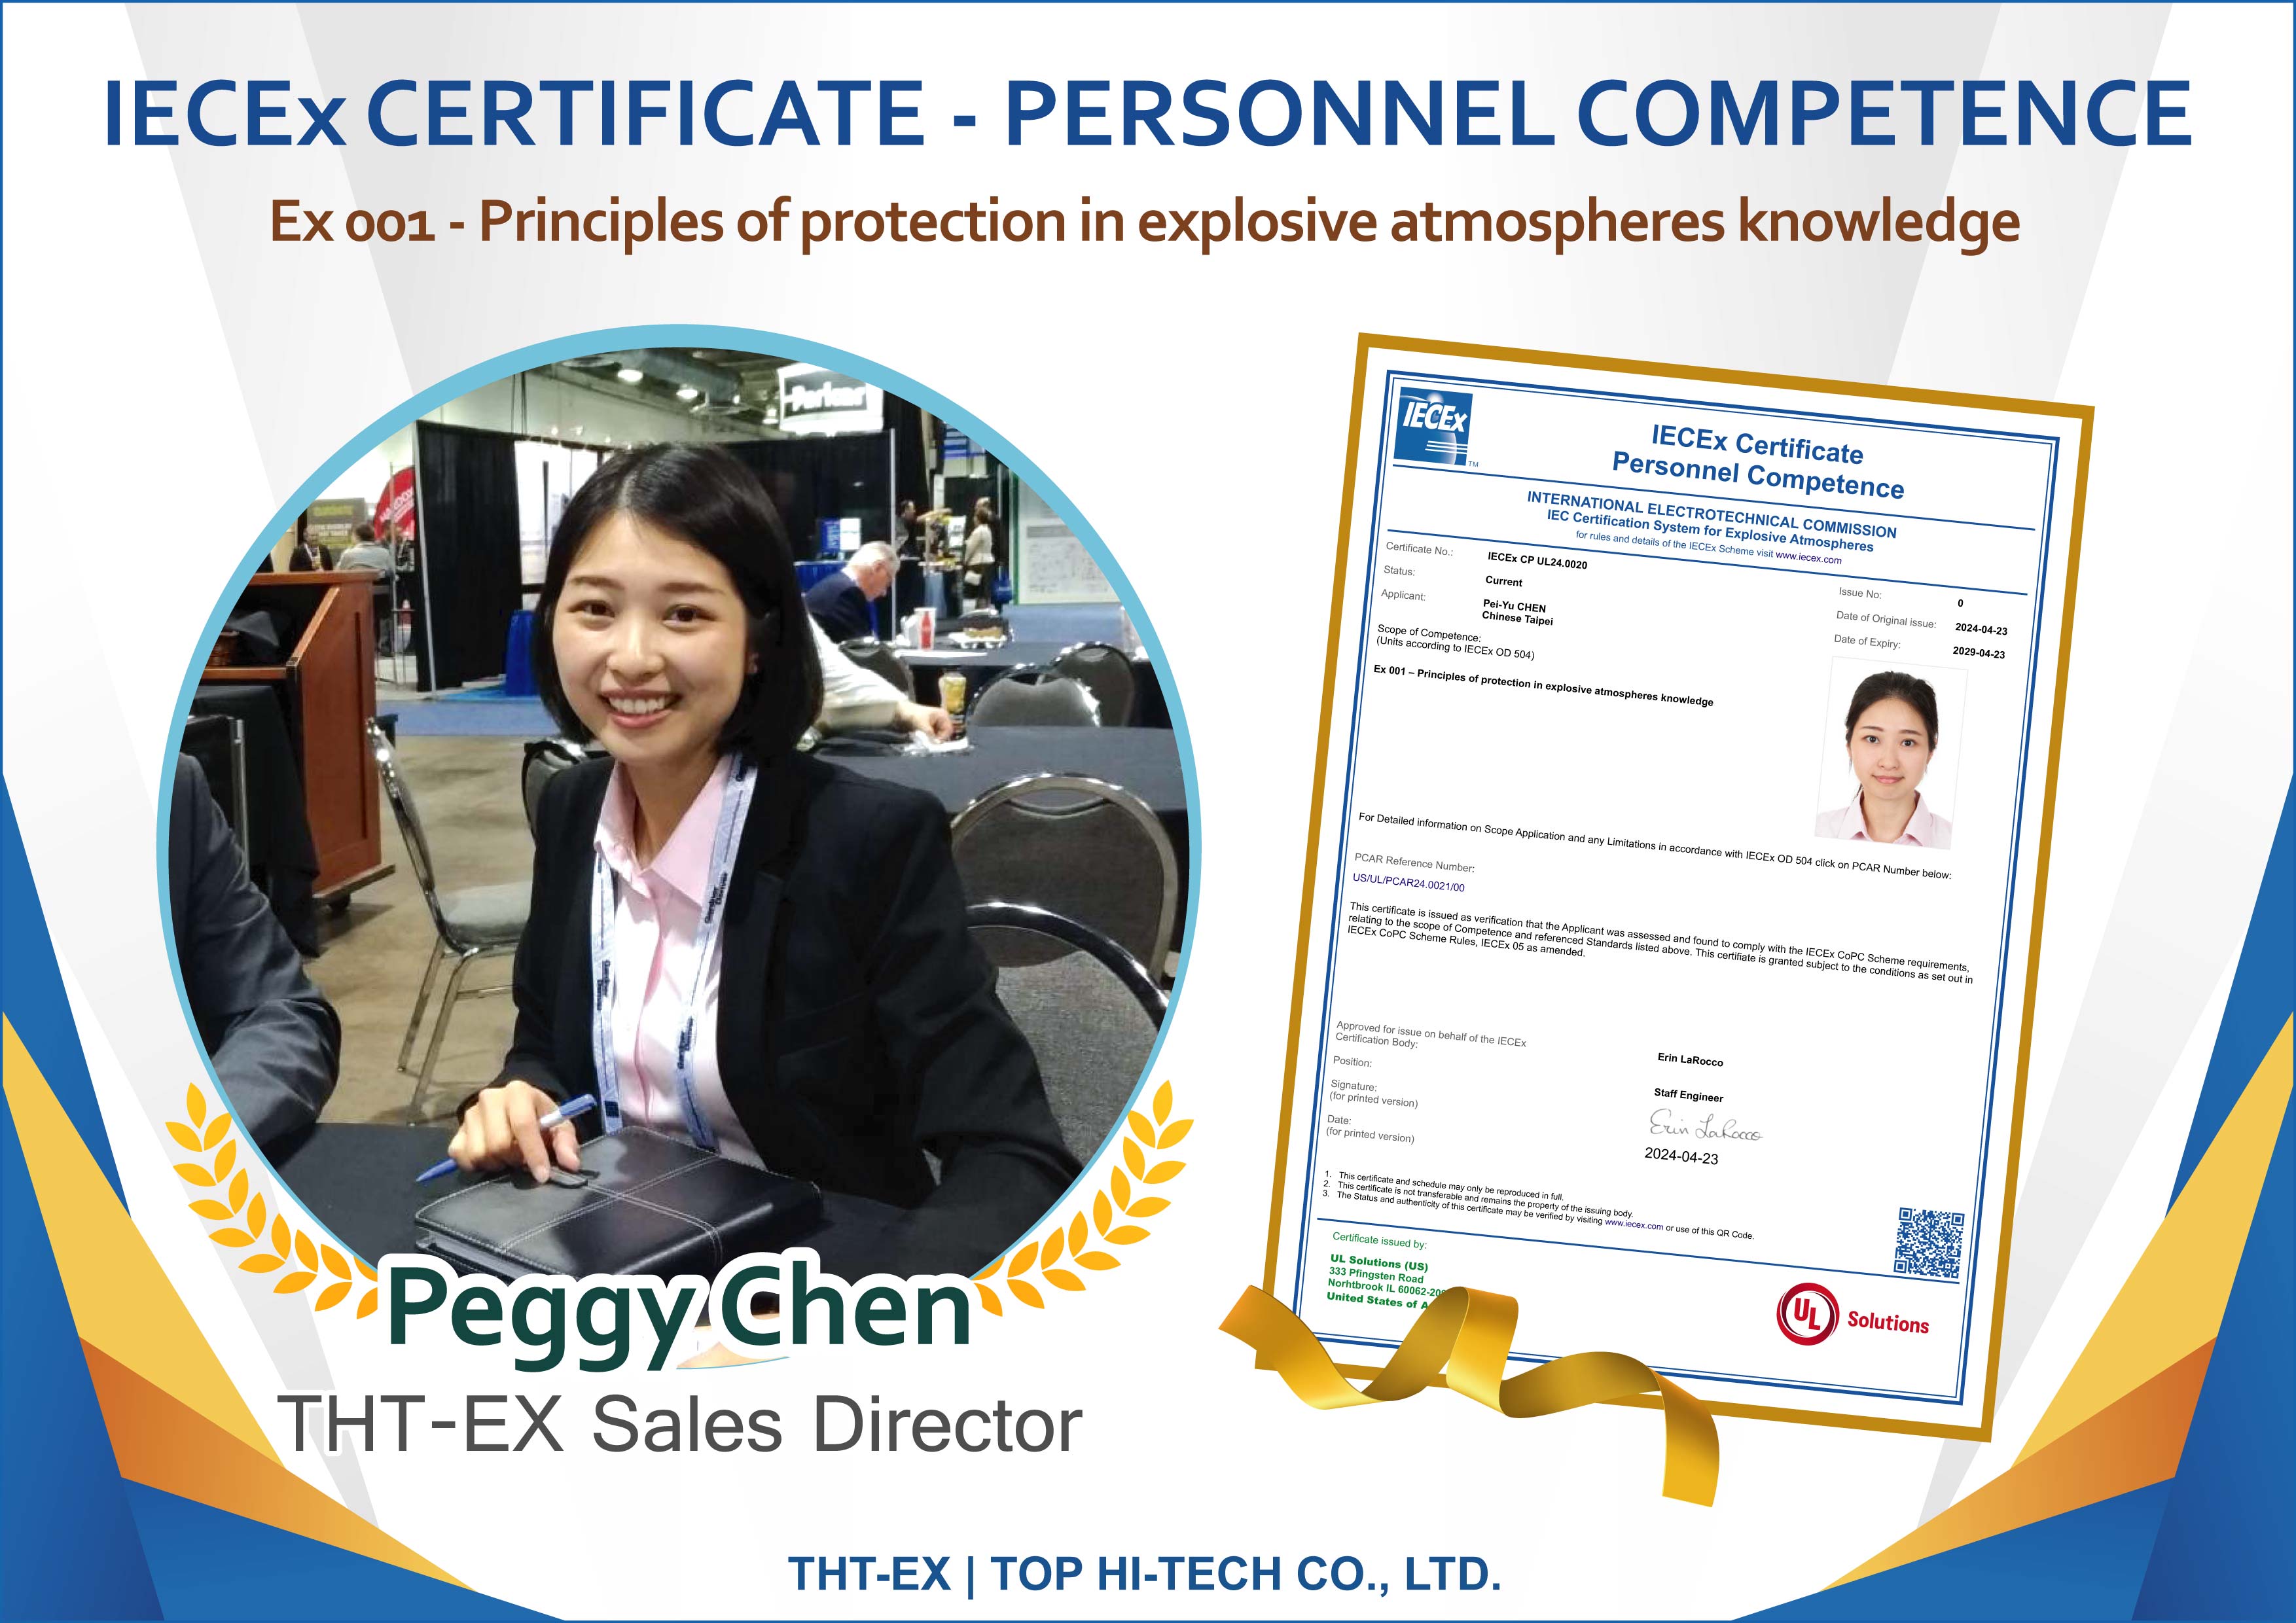 IECEx Explosion-proof Personnel Competency Certification – Peggy Chen, Sales Director